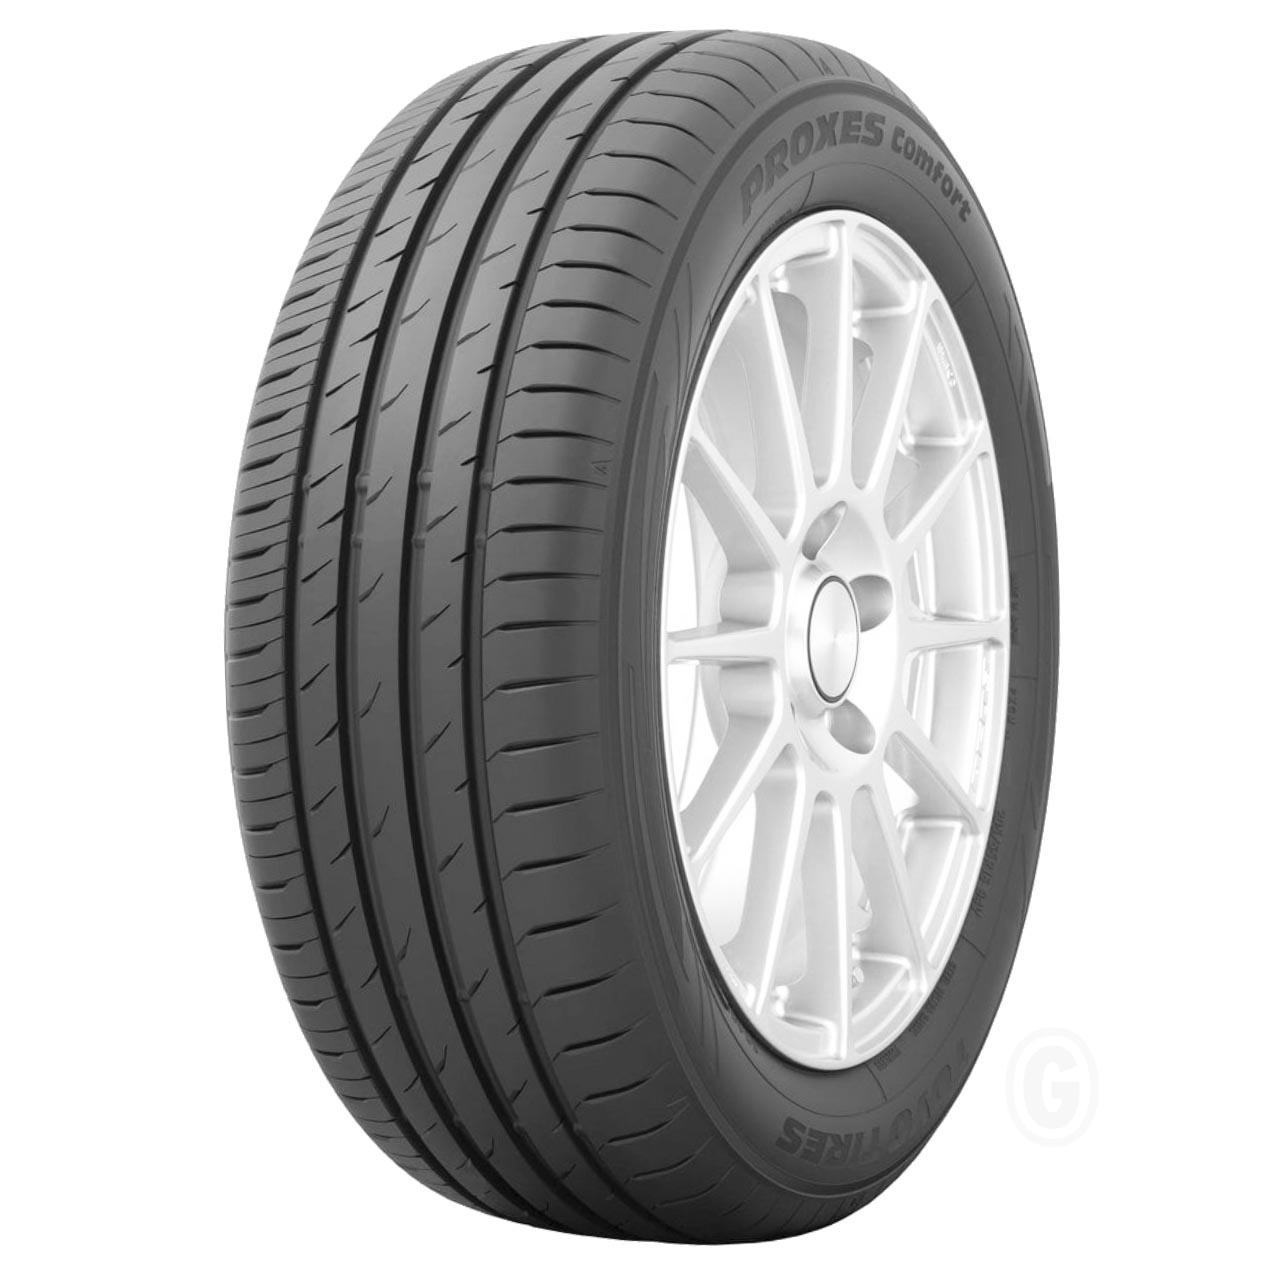 Toyo Proxes Comfort 195/55R20 95H XL